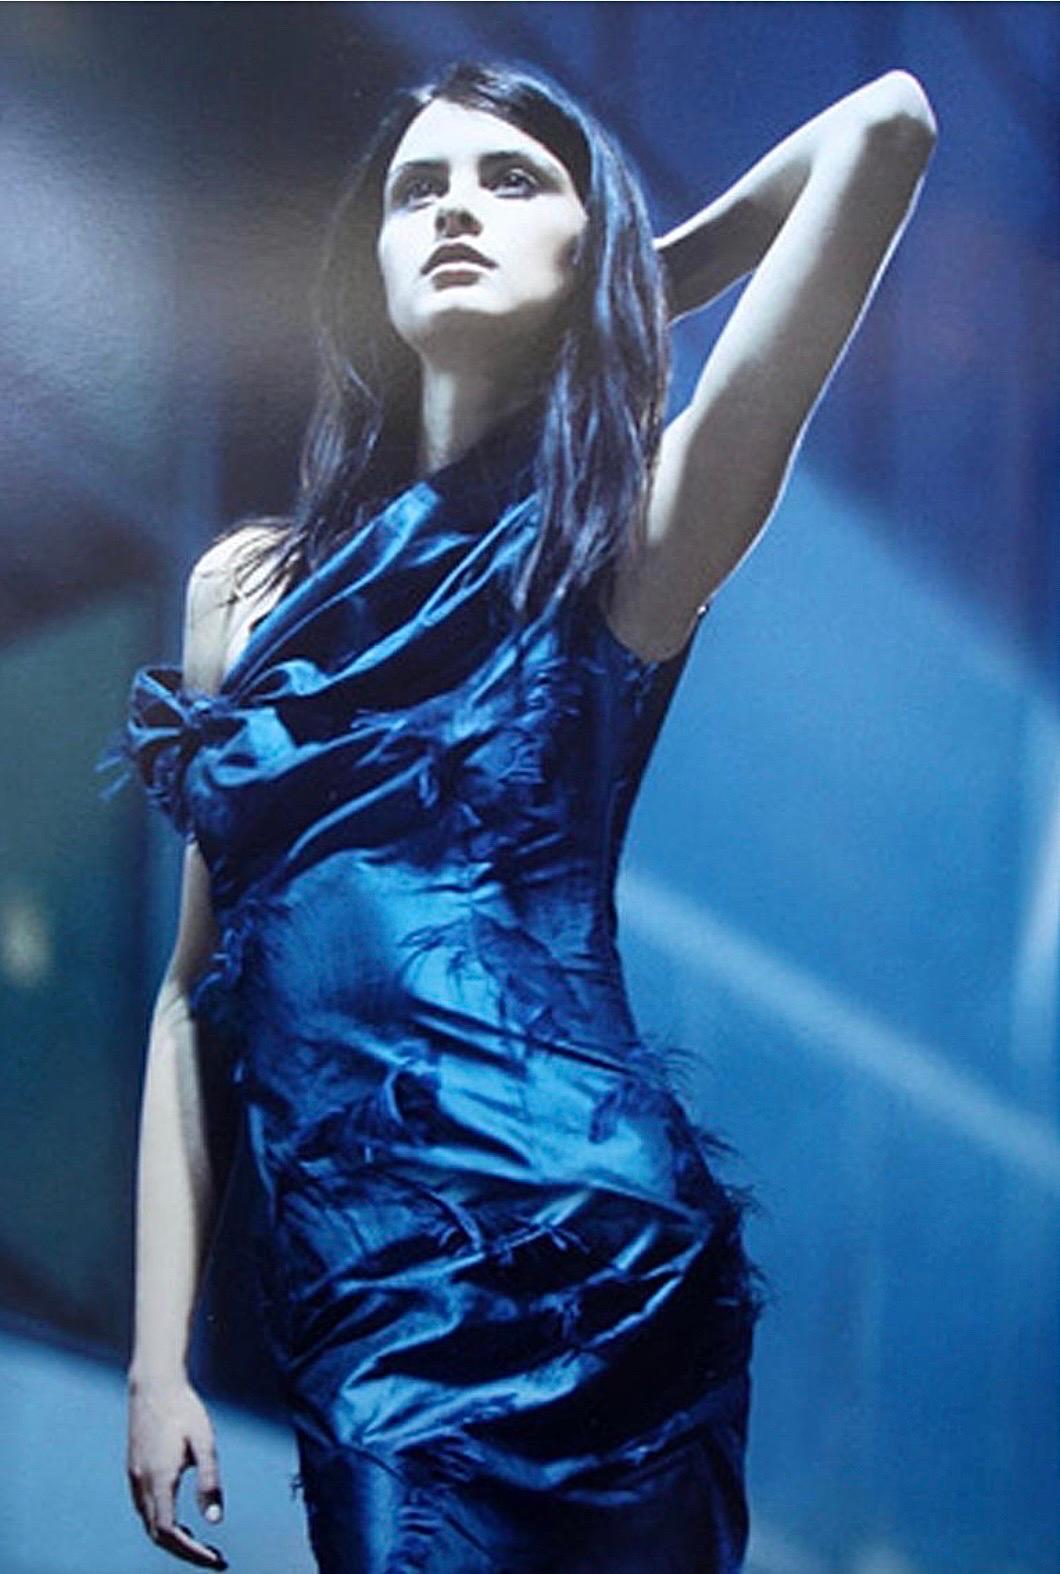 A well documented and totally timeless Christian Dior sapphire blue eyelash silk bias-cut gown from John Galliano's iconic 1999 fall-winter collection. John Galliano is widely considered one of the most innovative and influential fashion designers